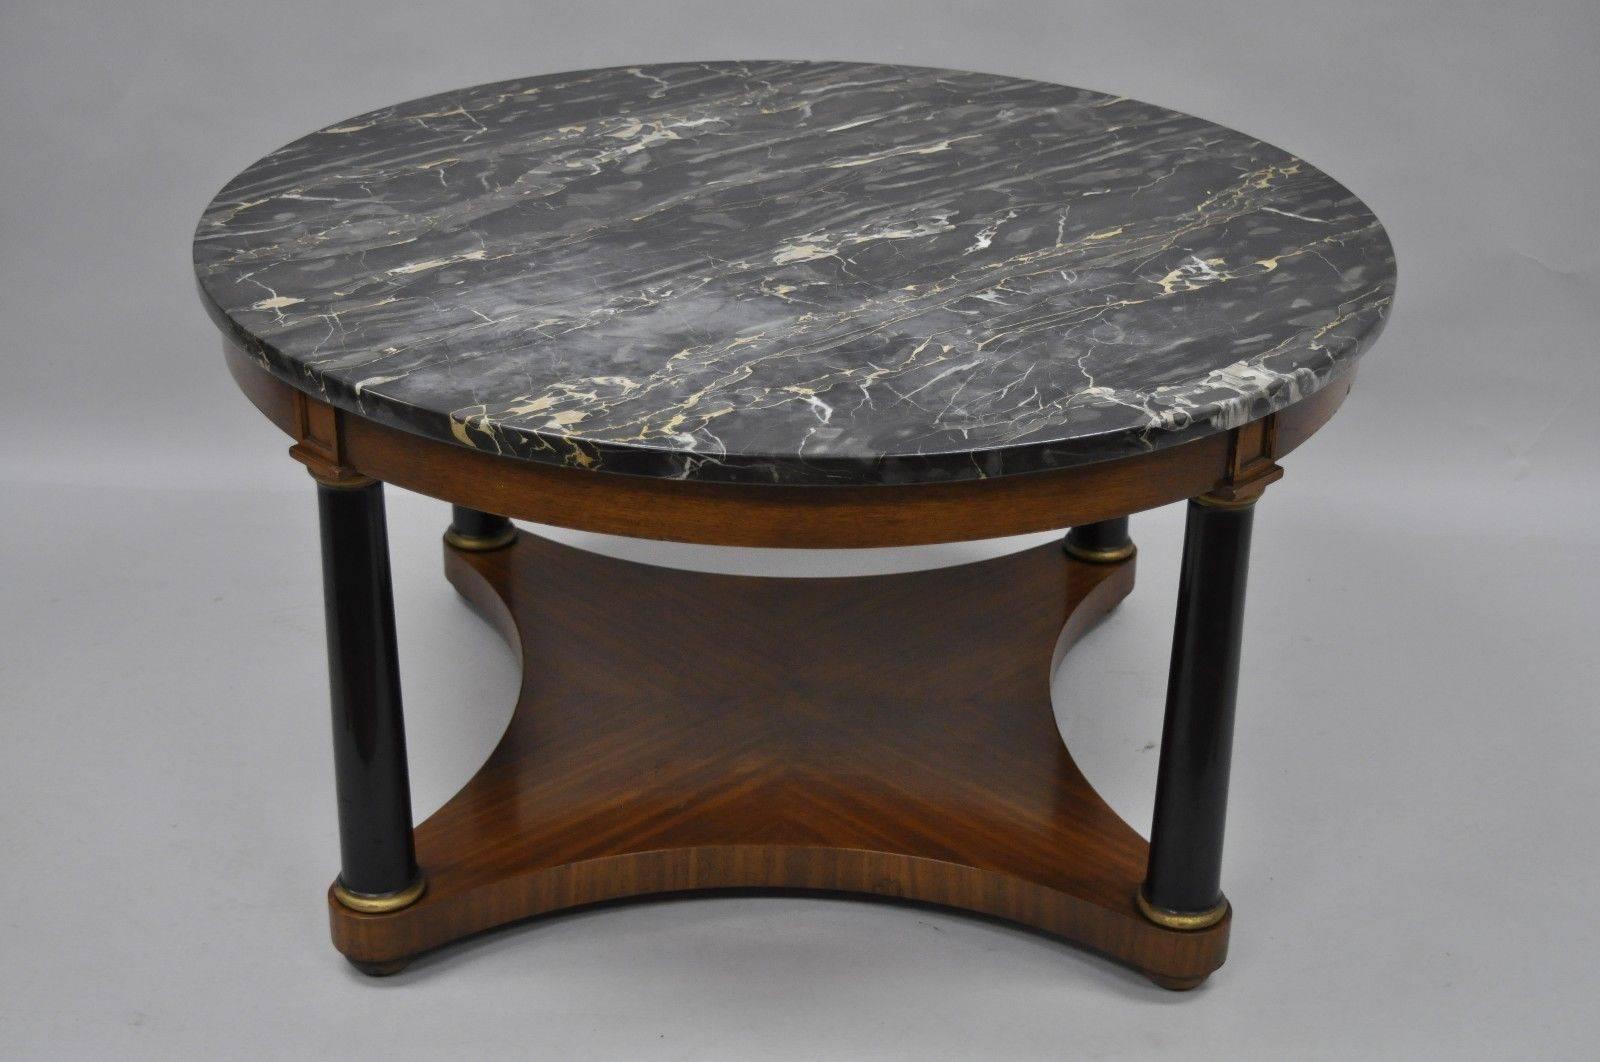 Antique round marble-top Empire style coffee table. Item features black marble top, black columns, lower shelf, bun feet, gold accents, original Holzheimer Interiors tag which is/was a high end interior design firm. Measurements: 20.5